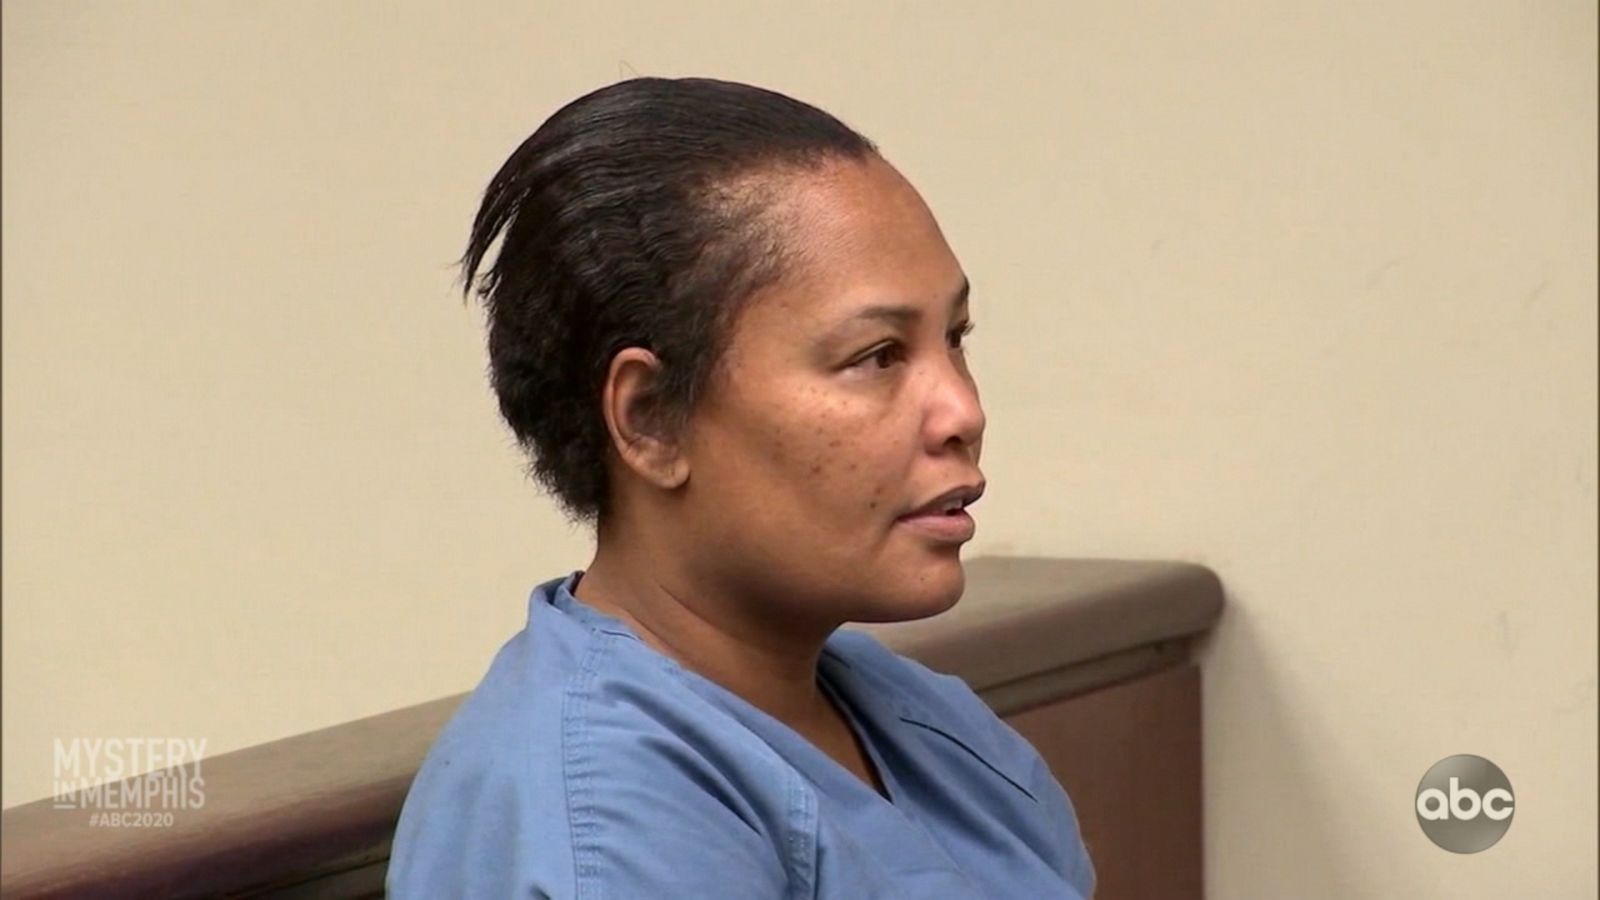 Lorenzen Wright's ex-wife arrested on charges related to his murder